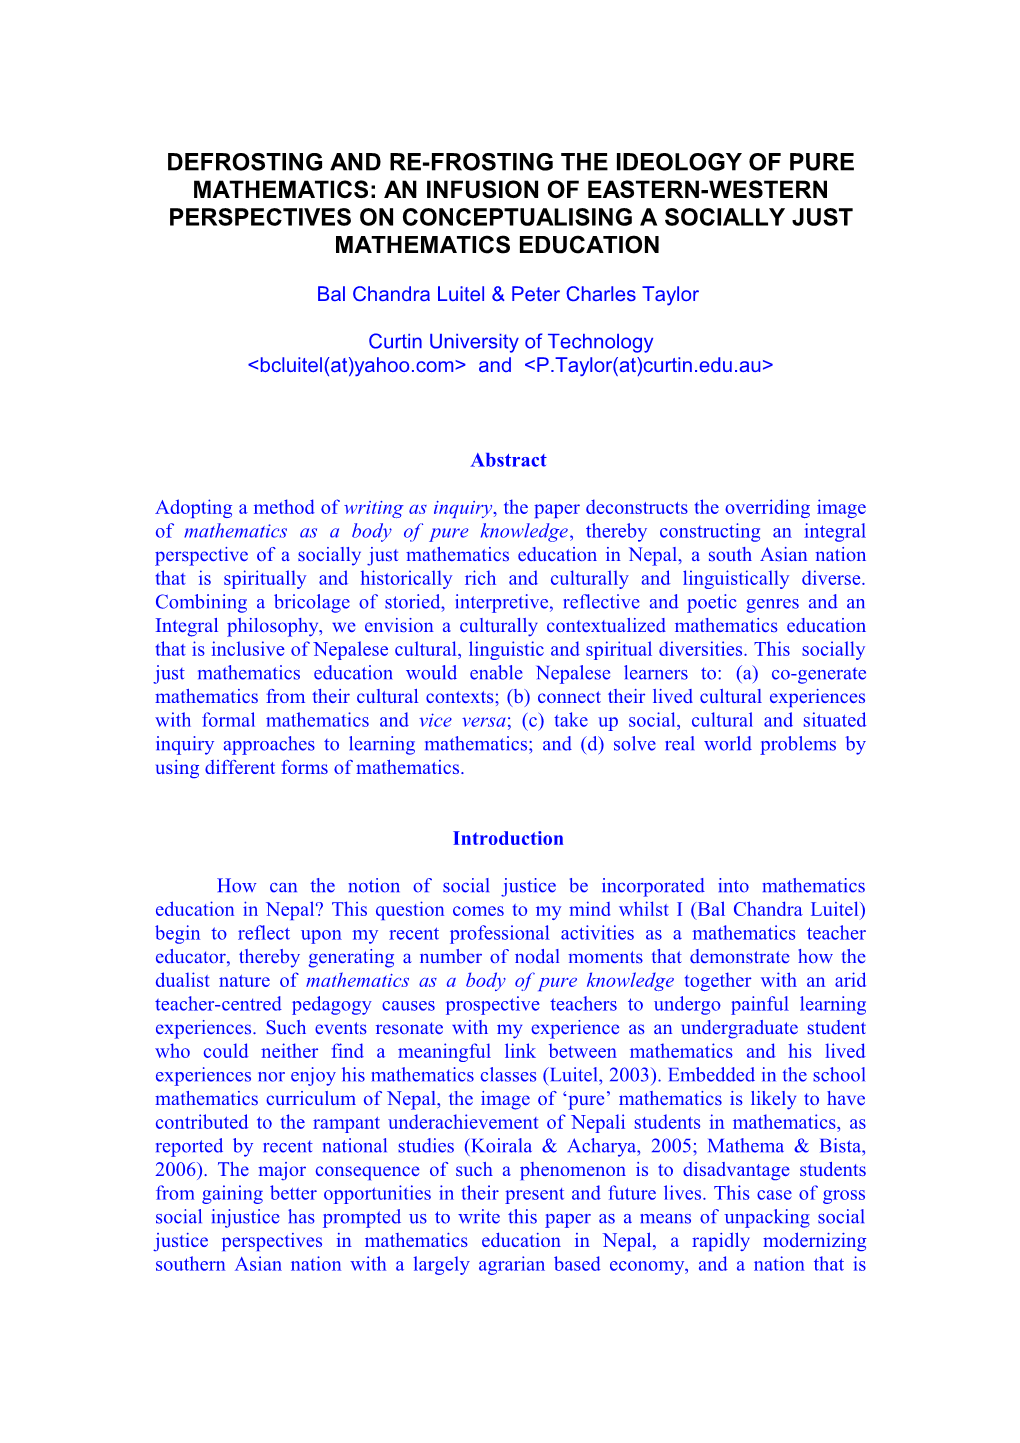 Defrosting and Re-Frosting the Ideology of Pure Mathematics: an Infusion of Eastern-Western